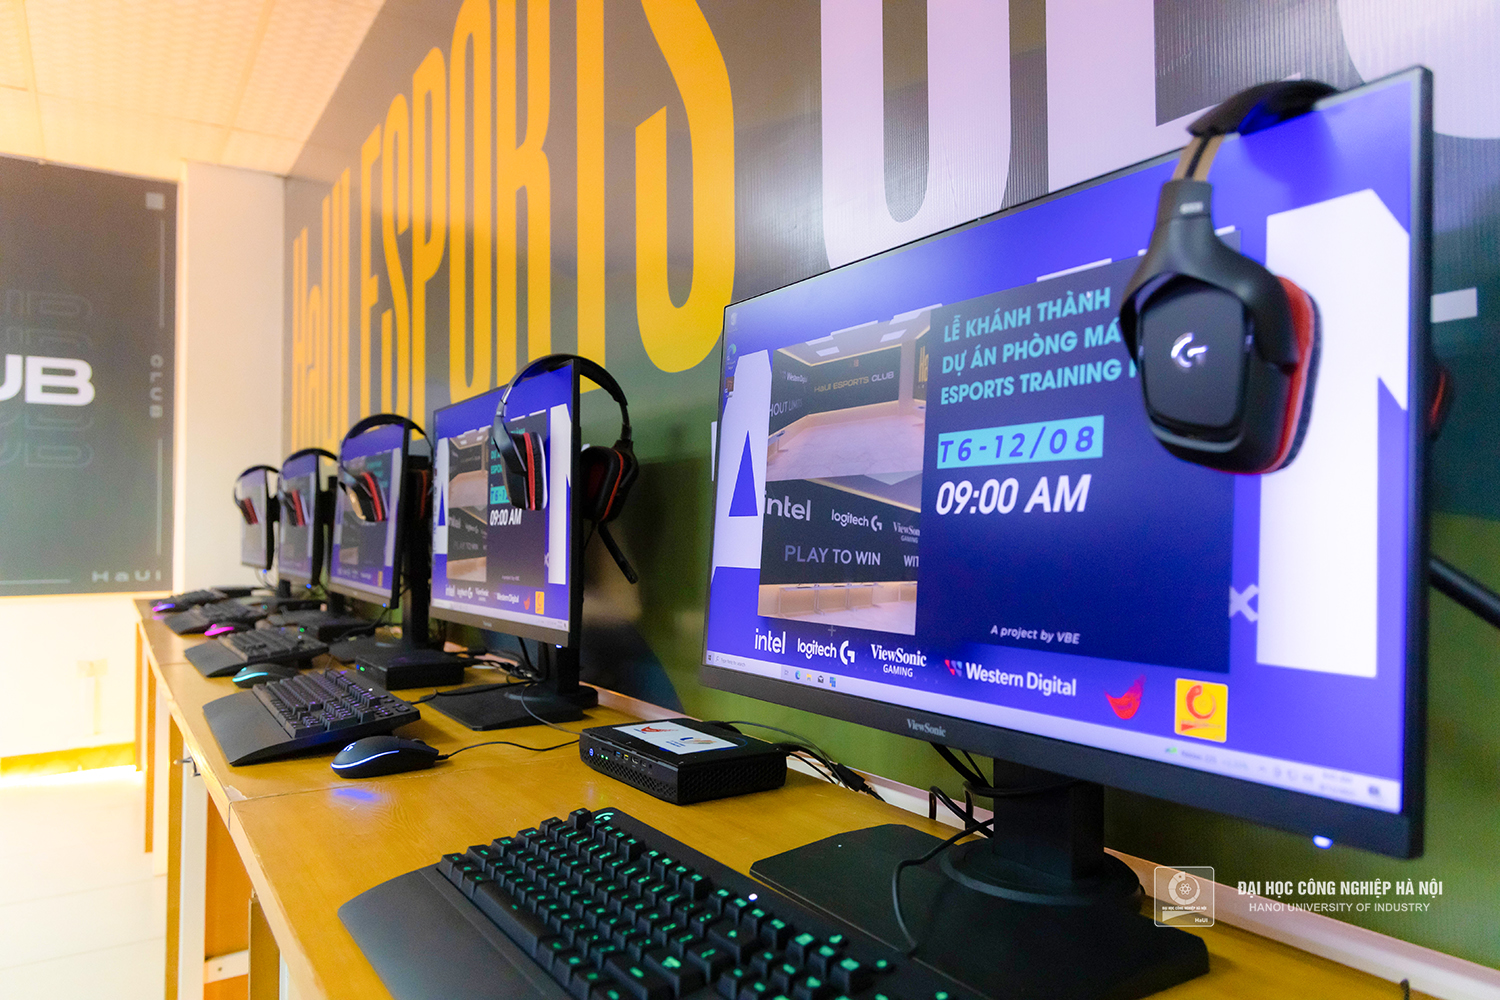 Hanoi University of Industry launched an e-Sports Training room